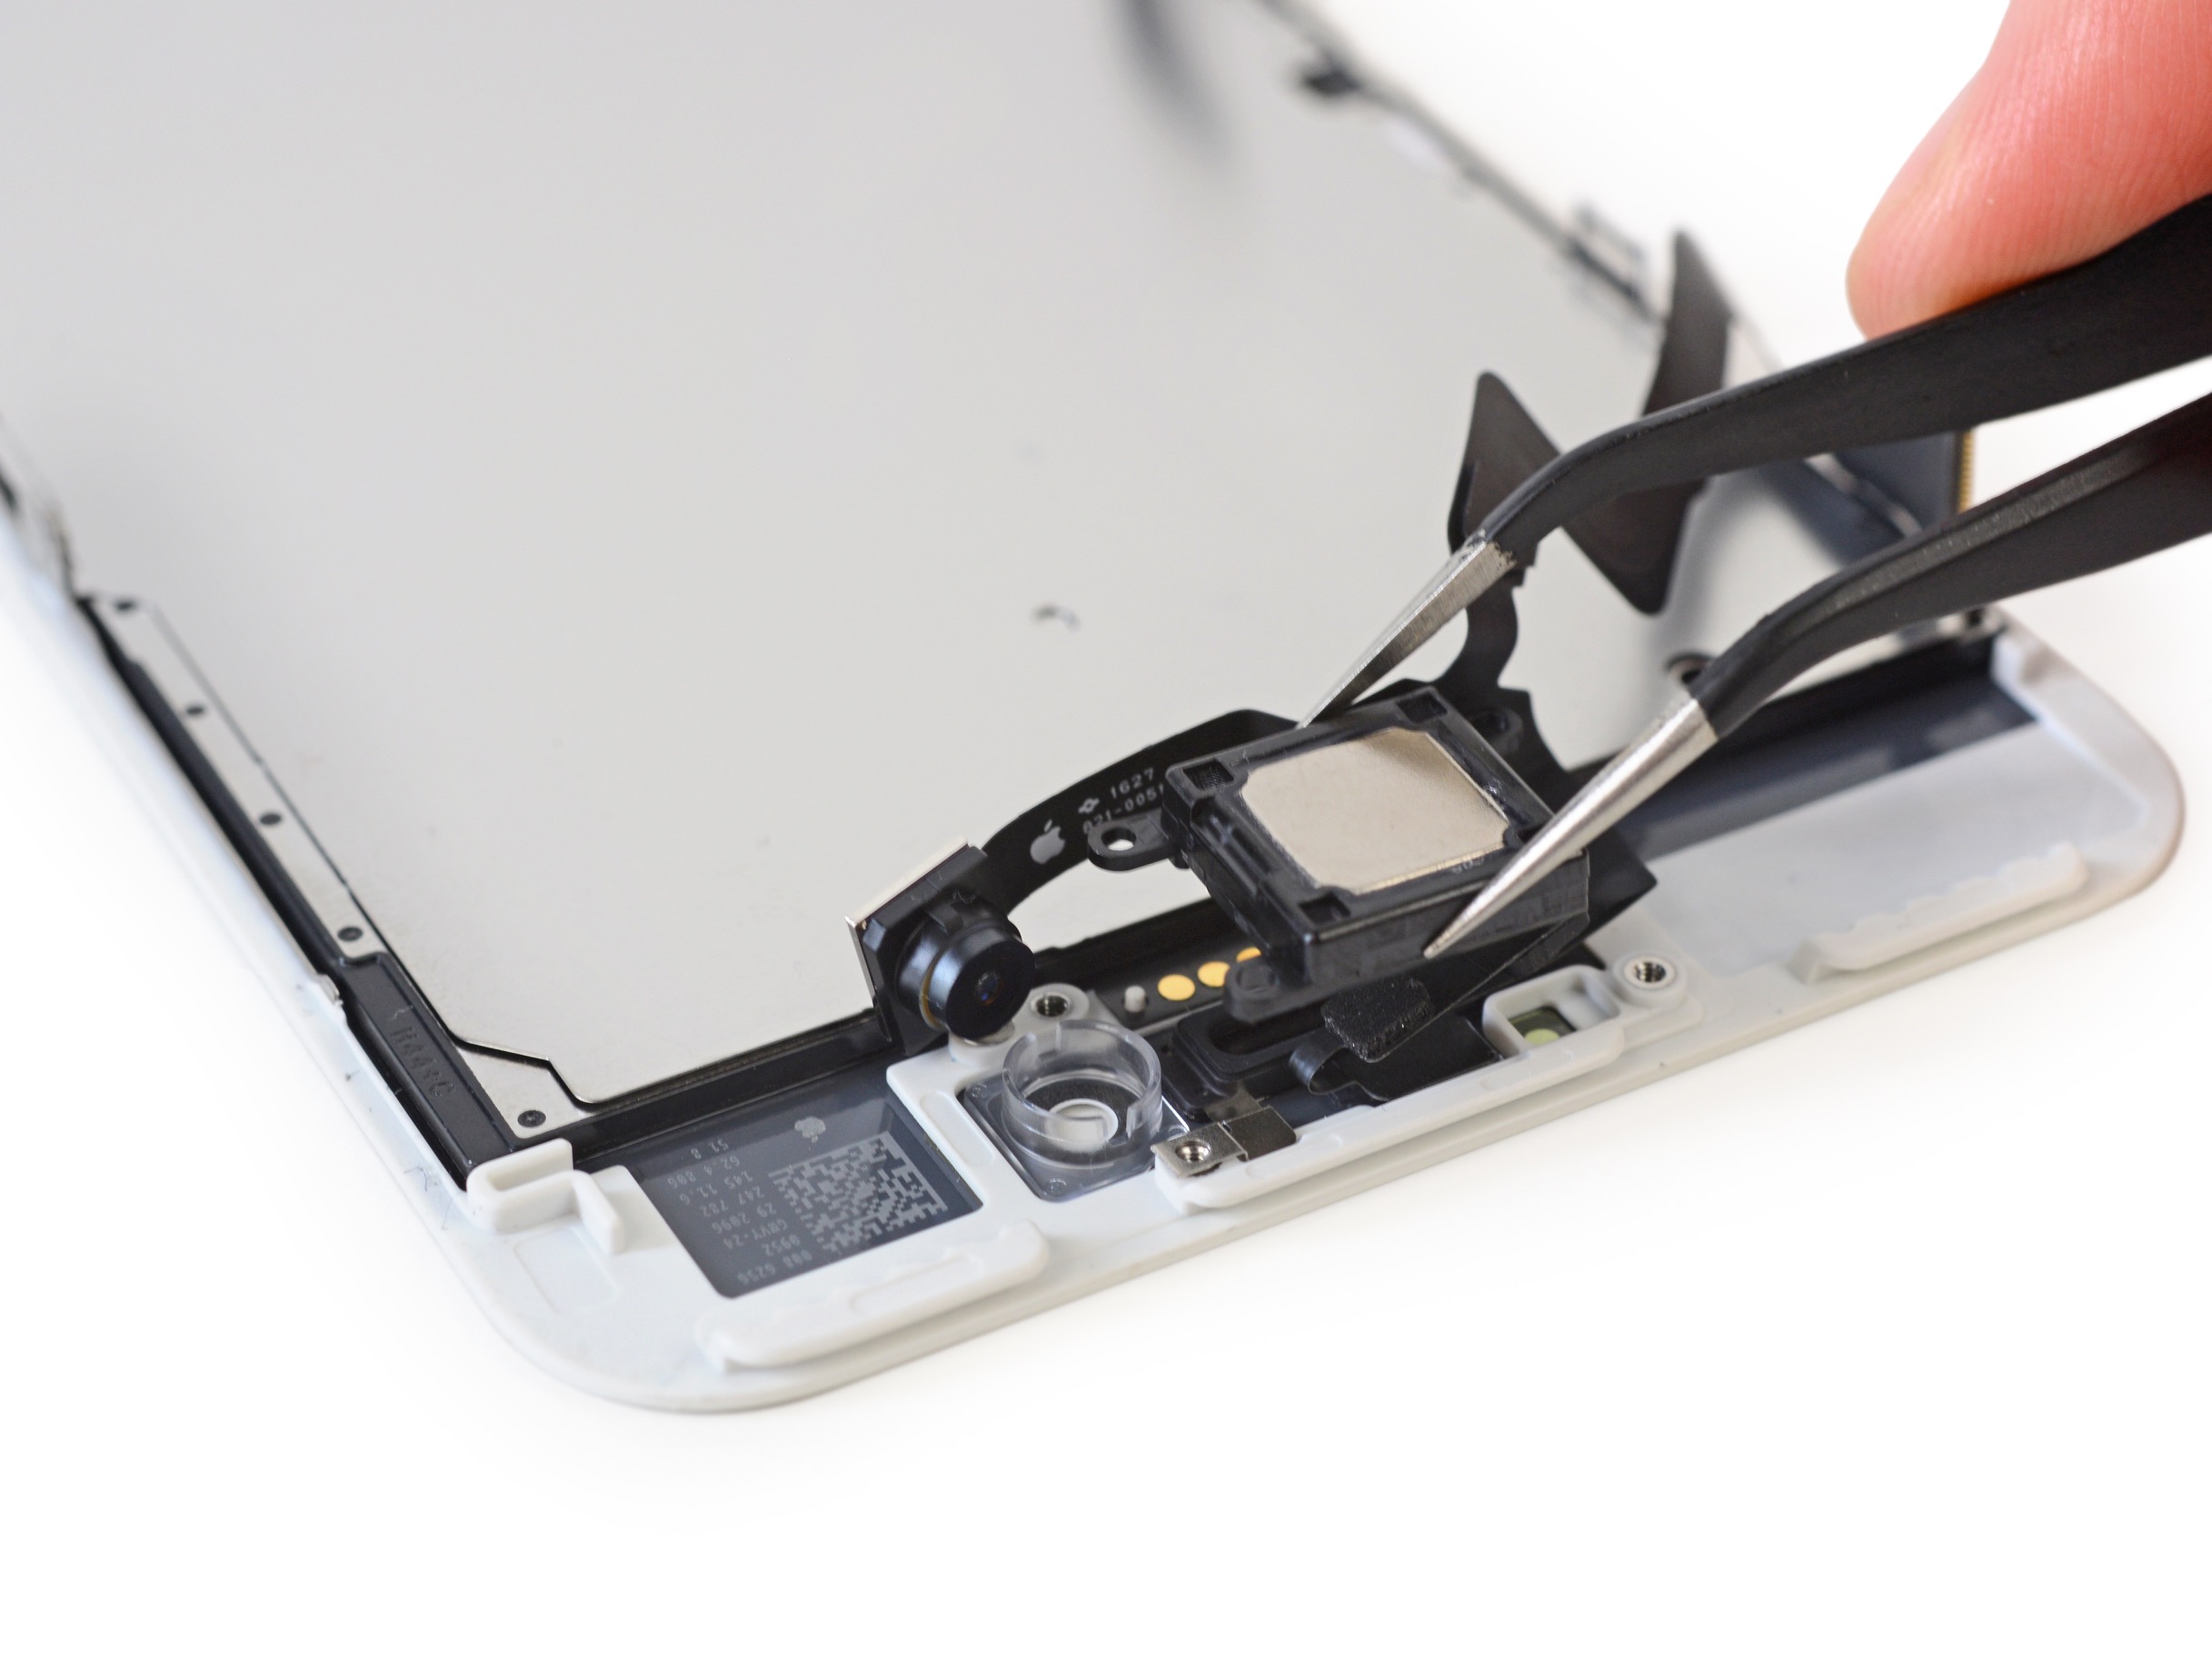 Disassembly of iPhone 7 Plus made by iFixit